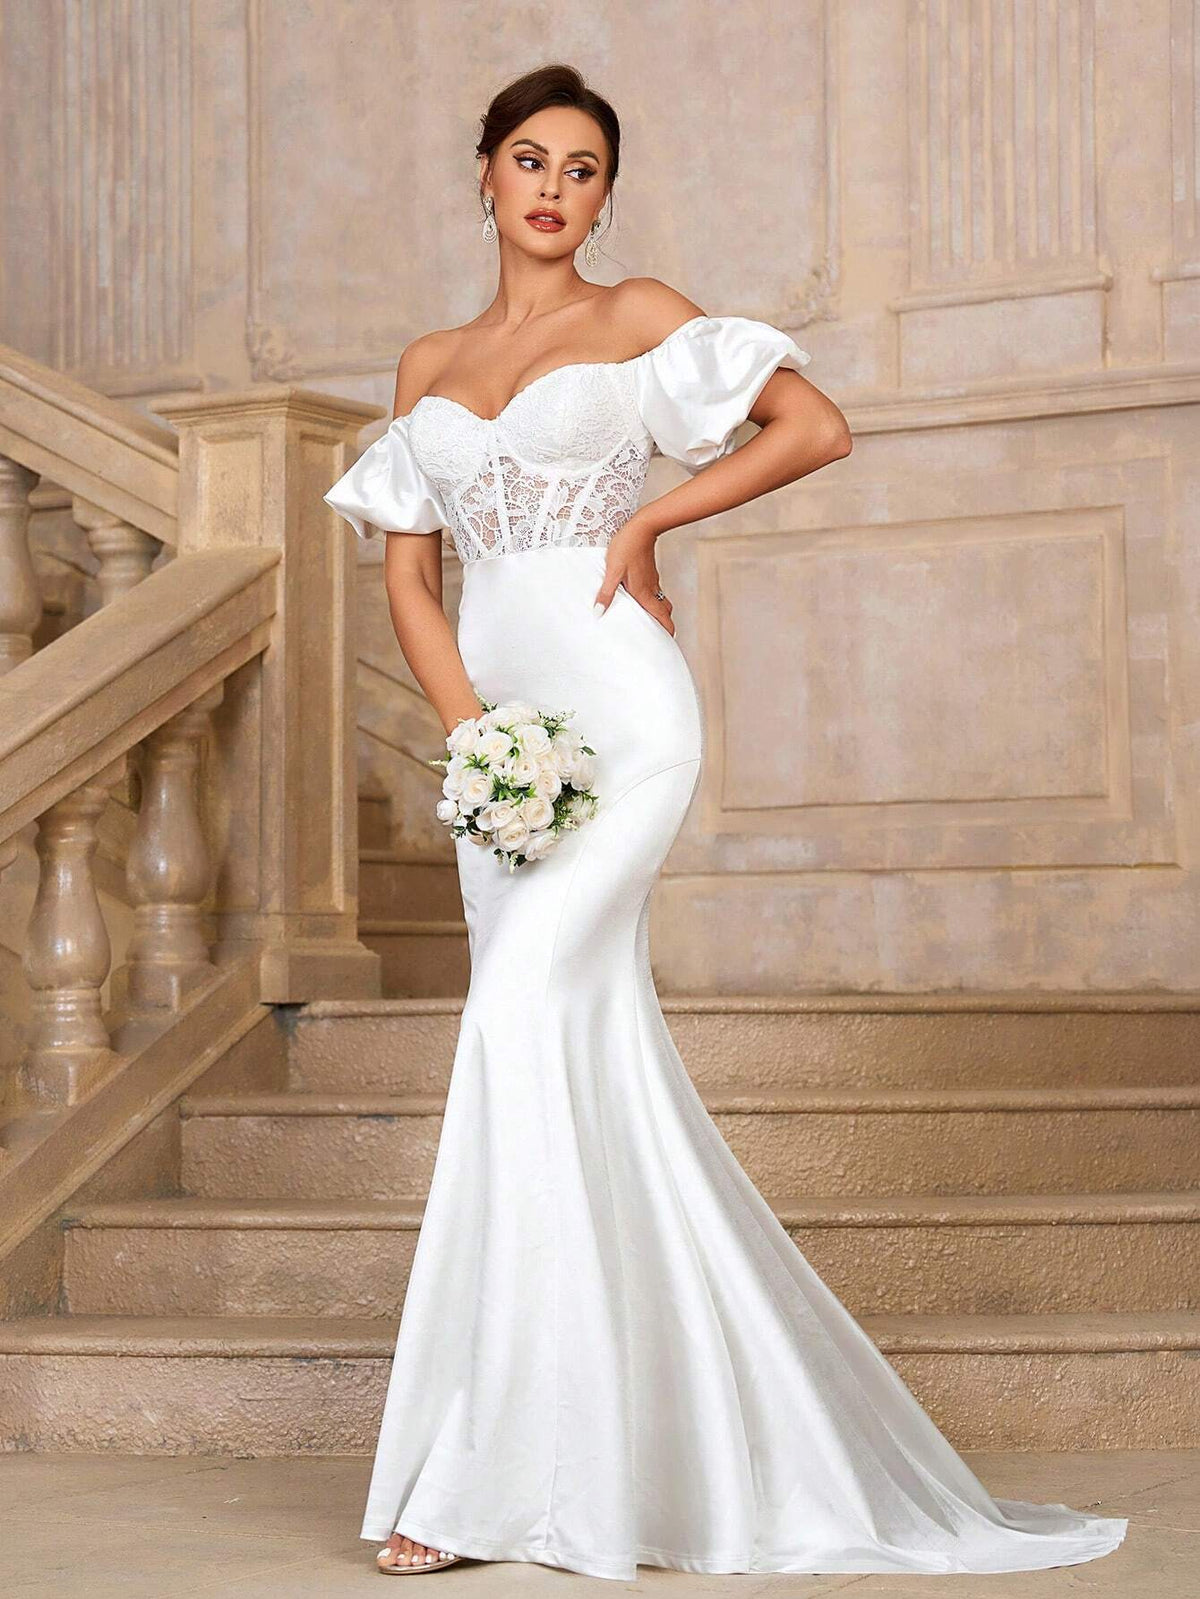 Elegant, Gorgeous, White Sexy Off-Shoulder Lace Wedding Dress, Dropped Shoulder Herringbone And Lace Decoration, Extra Long Train Wedding Dress For Wedding Prom Party